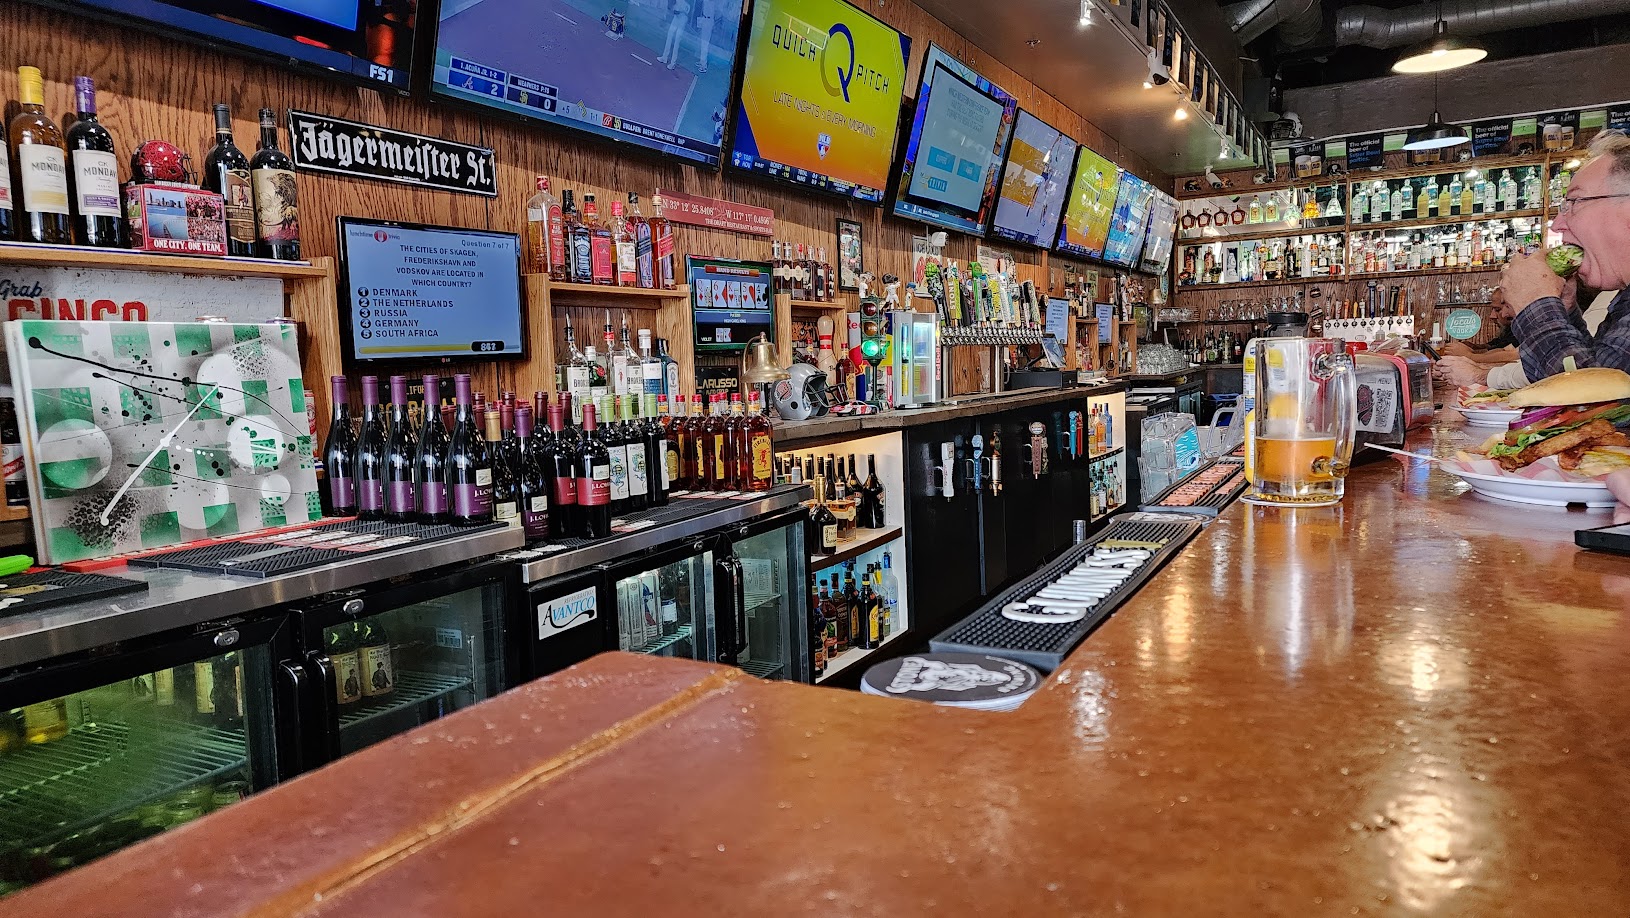 The Draft Restaurant and Sports Bar